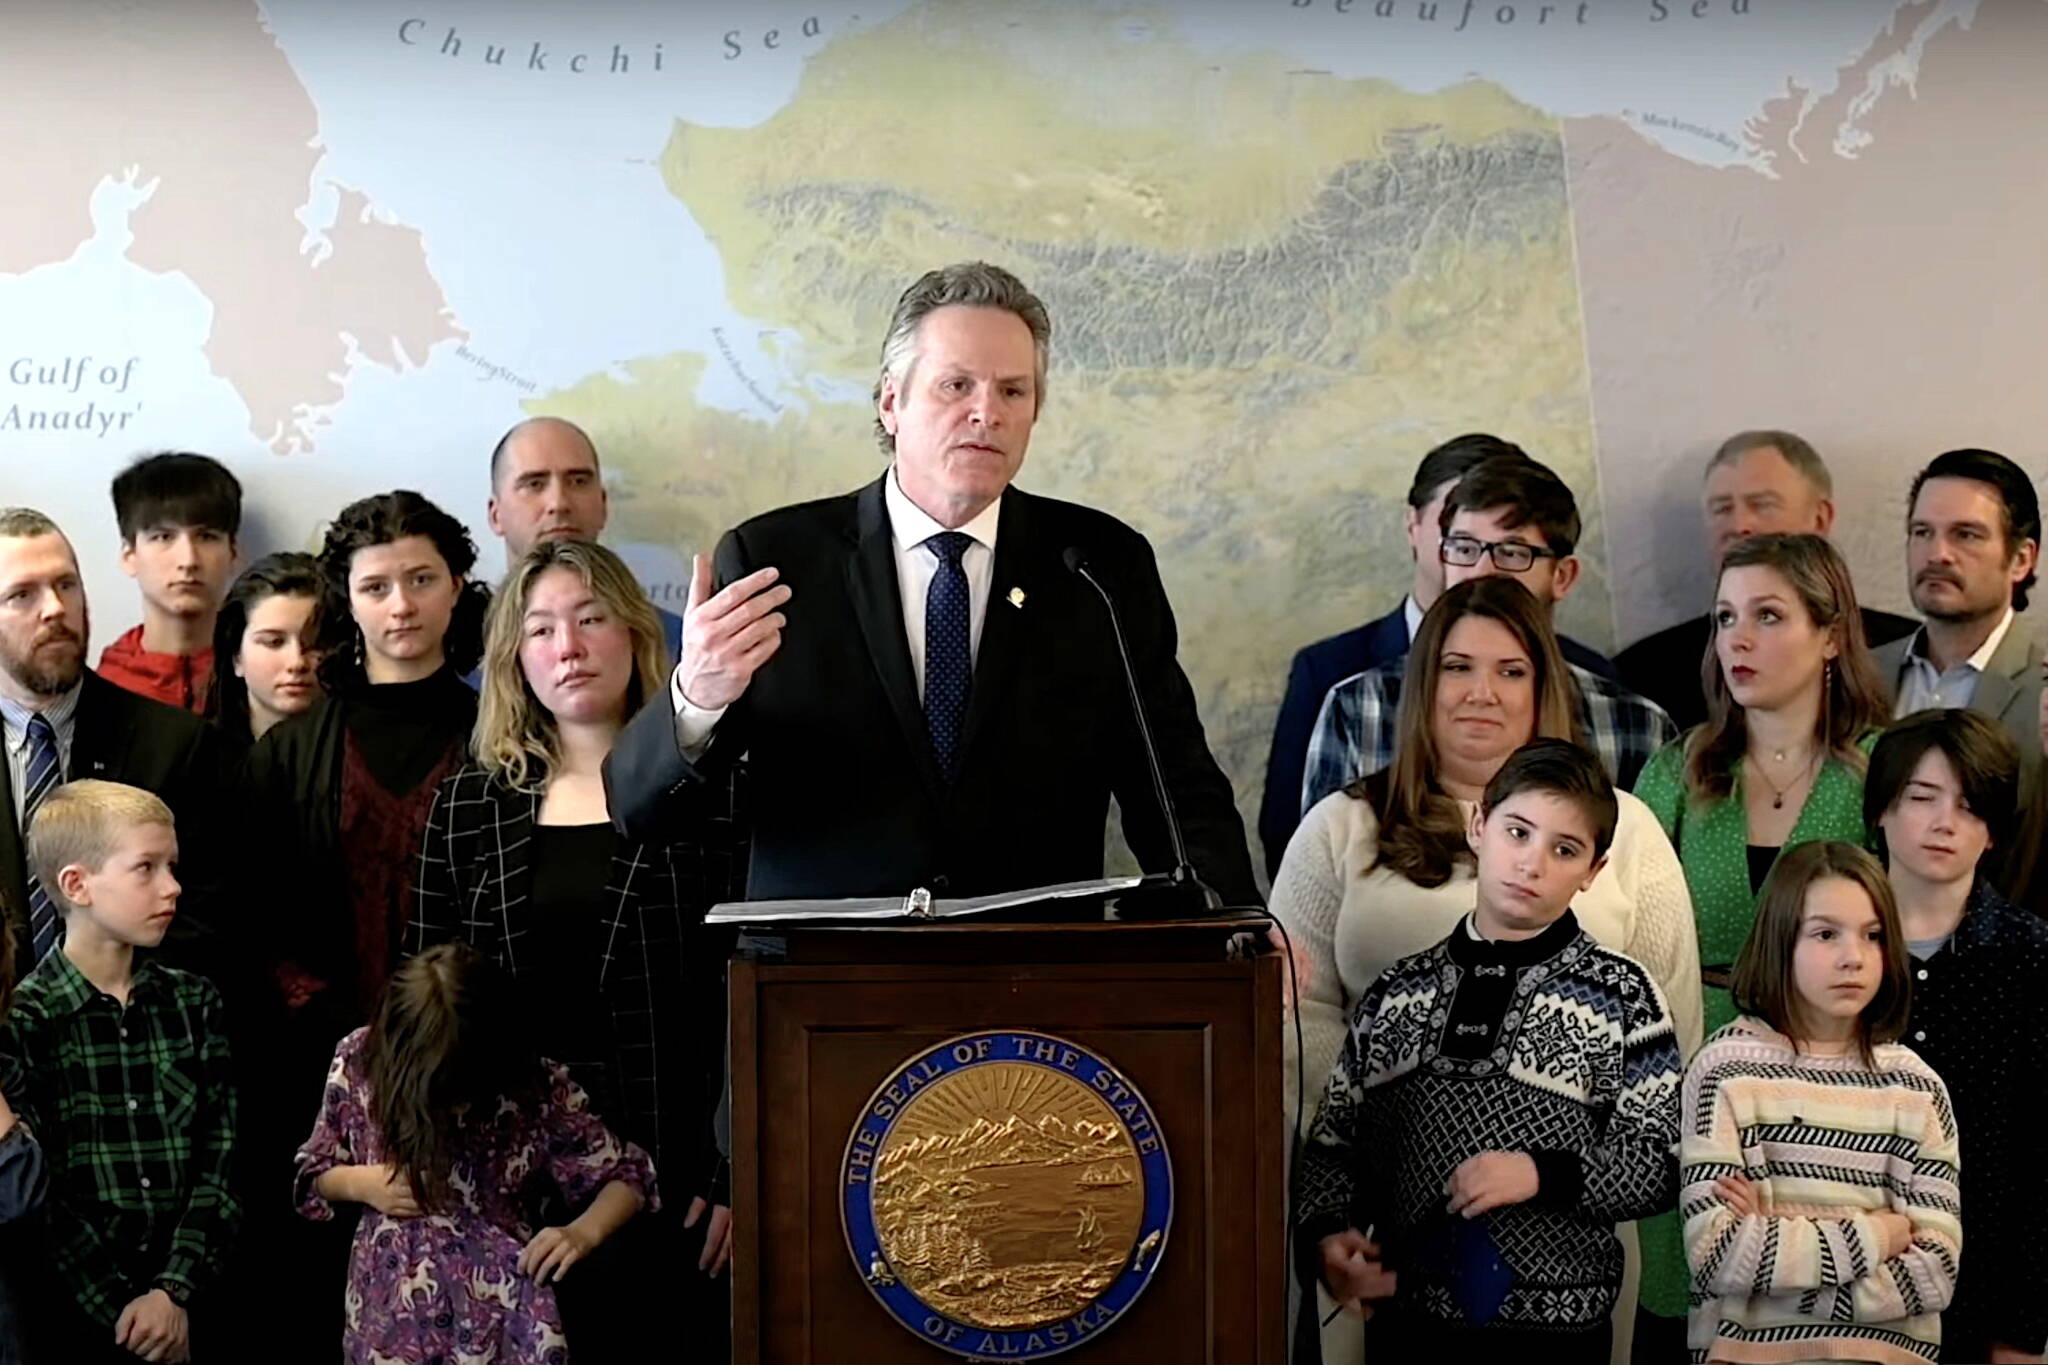 Gov. Mike Dunleavy unveils proposals to offer public school teachers annual retention bonuses and enact policies restricting discussion of sex and gender in education during a news conference in Anchorage. (Screenshot)